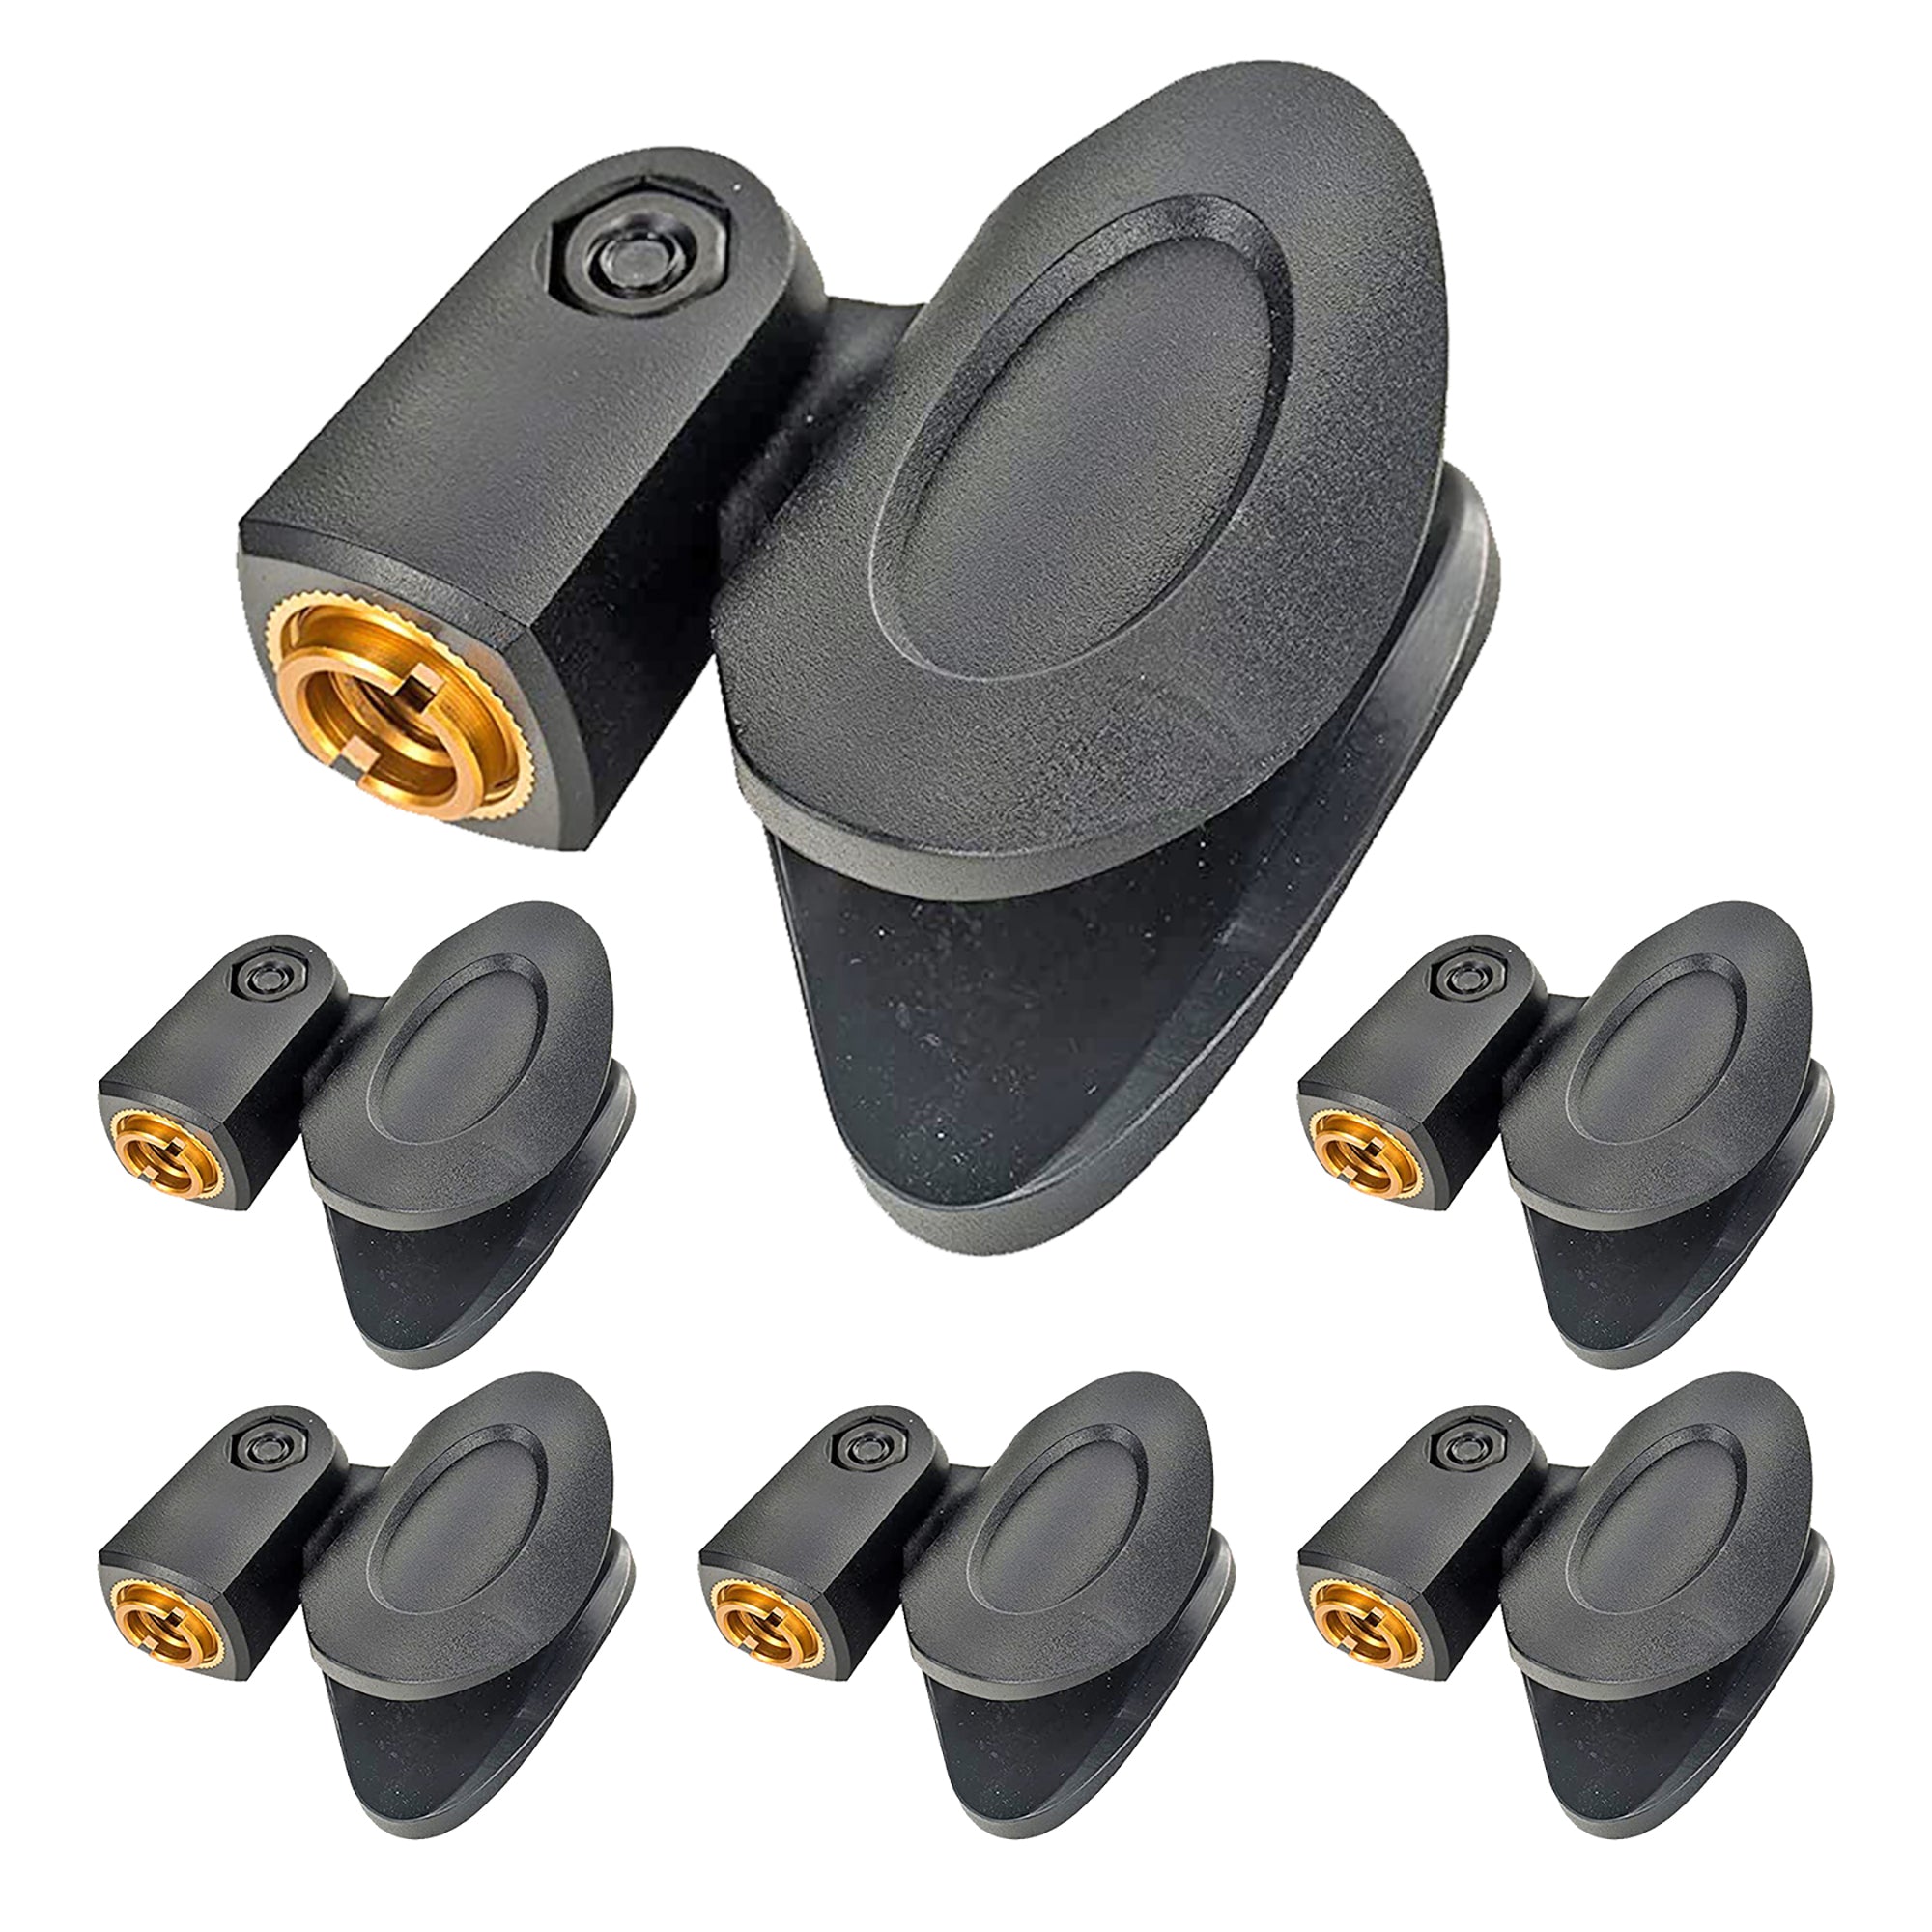 5 Core Universal Microphone Clip 6 Pieces Mic Holder with 5/8" Male to 3/8" Female Screw Adapter Soporte Para Microfono - MC 02 6PCS